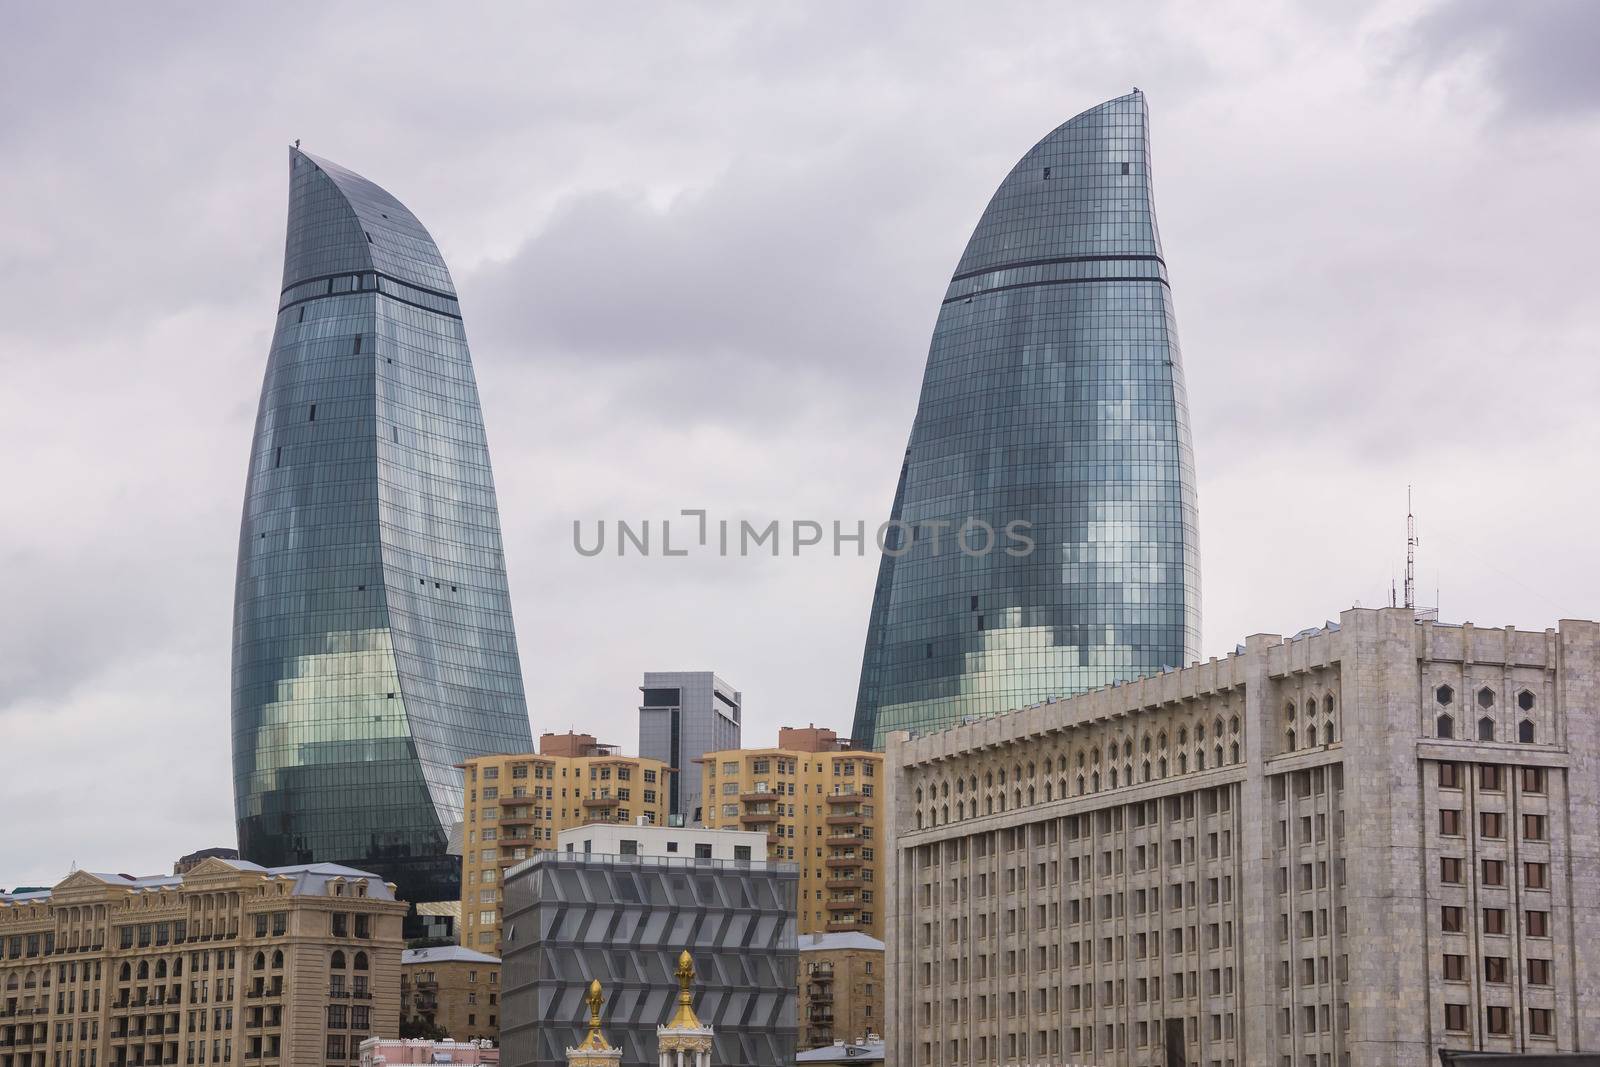 City view of the capital of Azerbaijan, on September 11, 2012, with great modern architecture. Baku is one of the fastest growing cities in the area of the Caspian Sea.